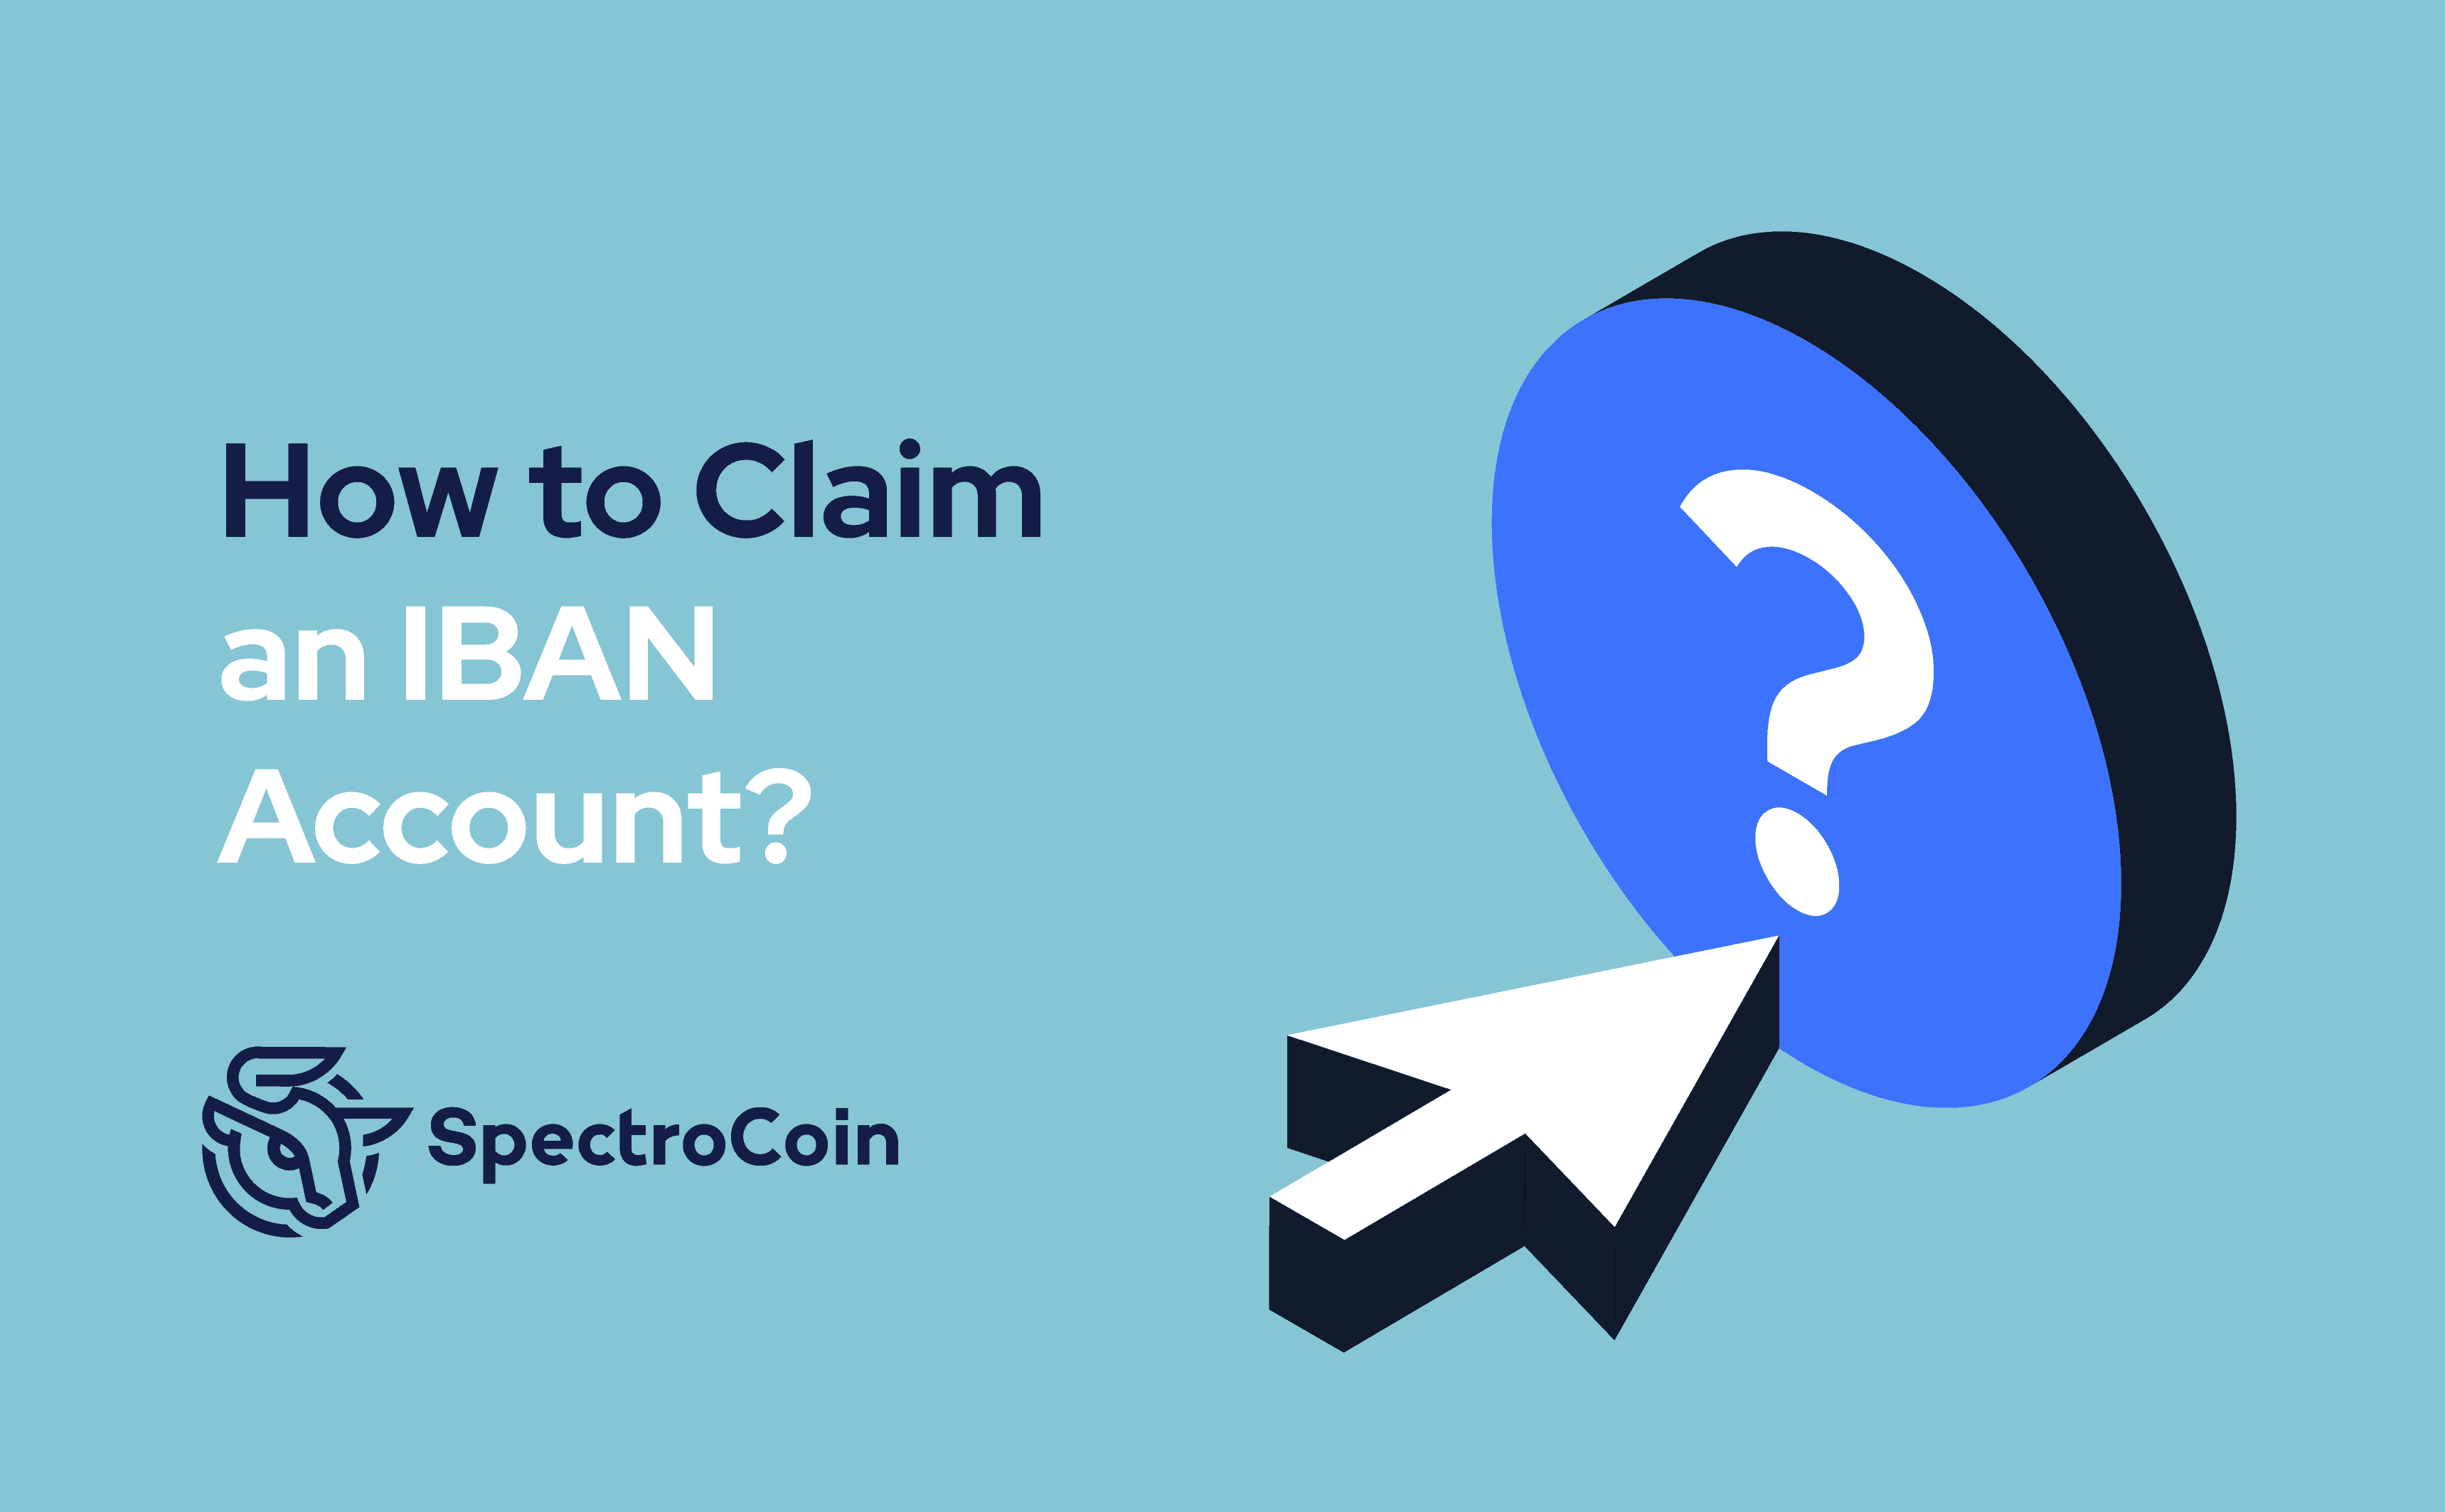 Learn how to claim an IBAN account at SpectroCoin.